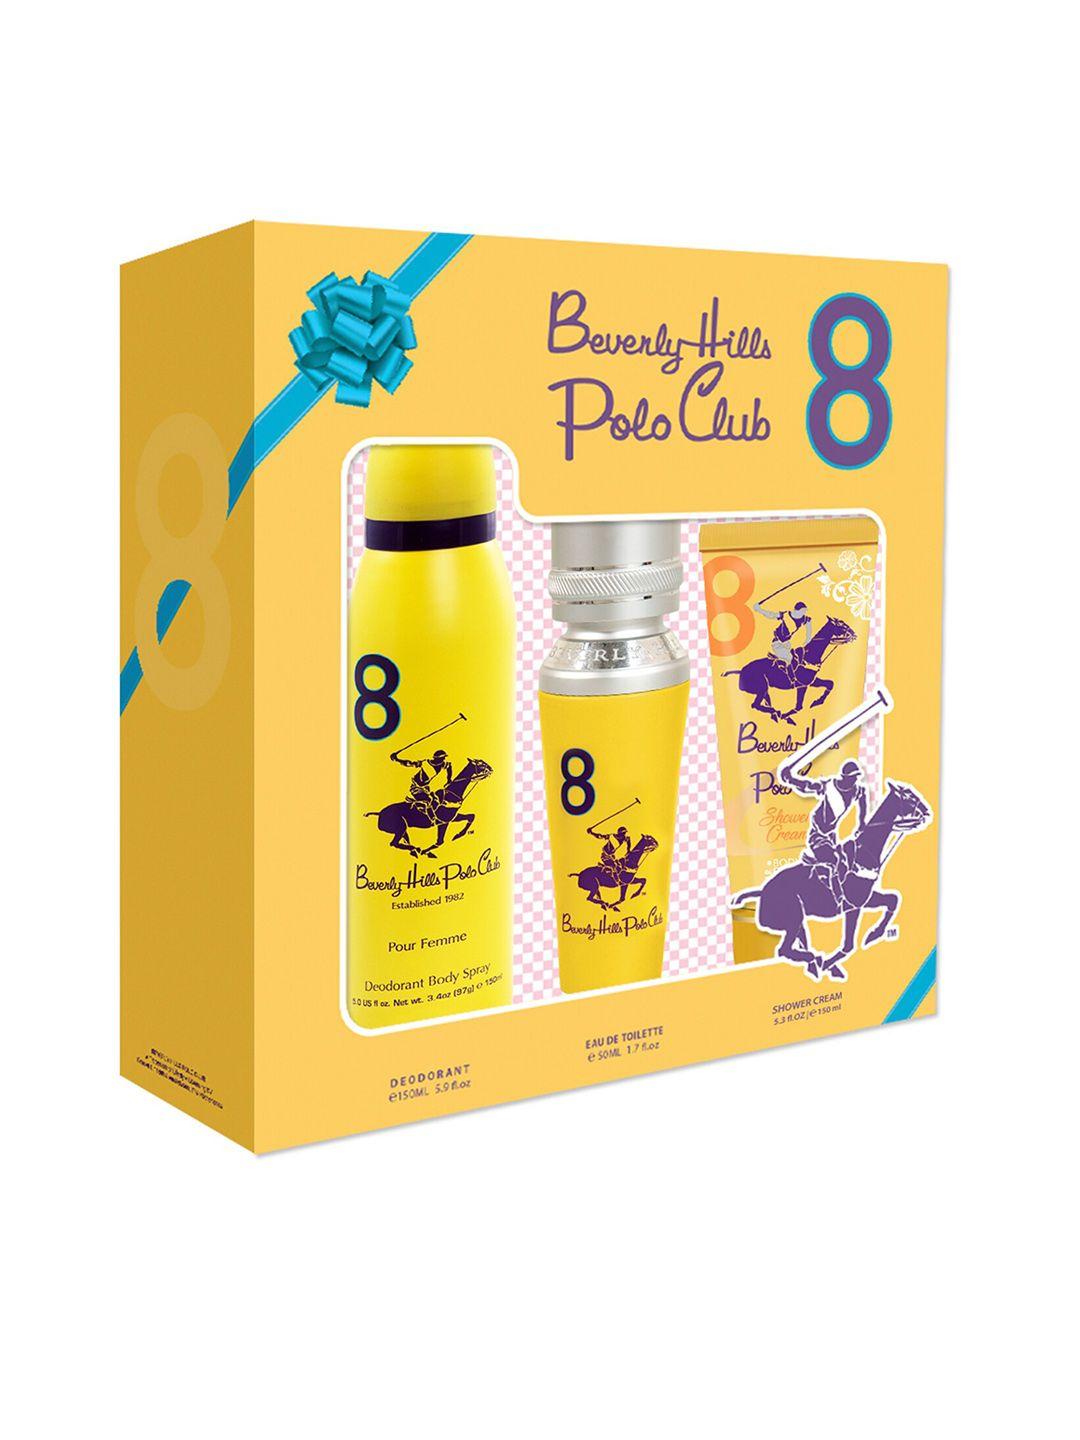 beverly hills polo club fragrance gift set